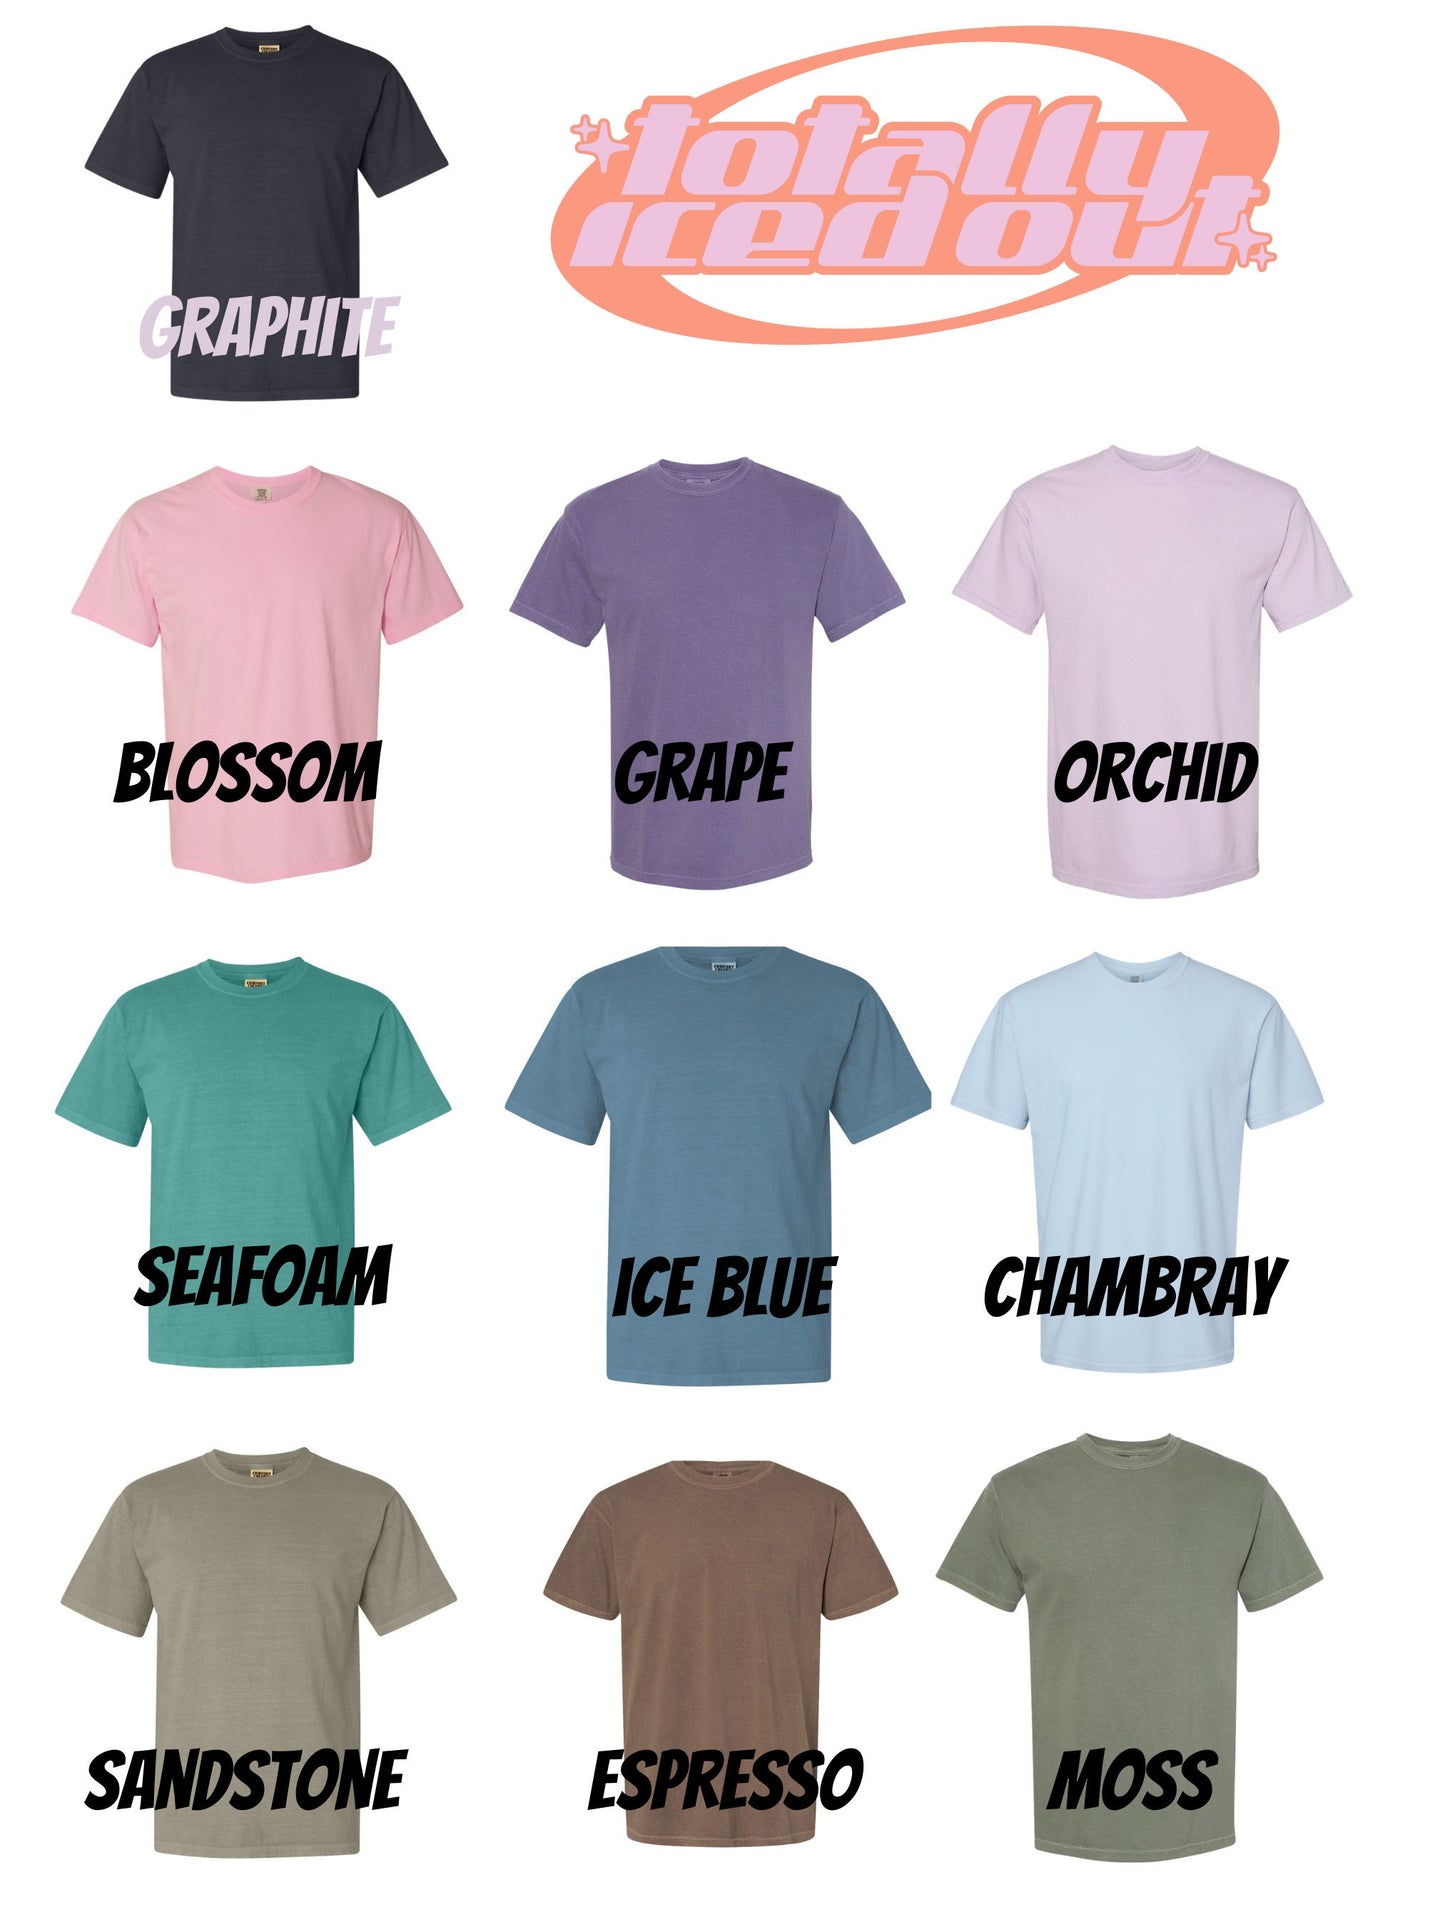 Mom's Favorite Embroidered Unisex Comfort Colors Tee